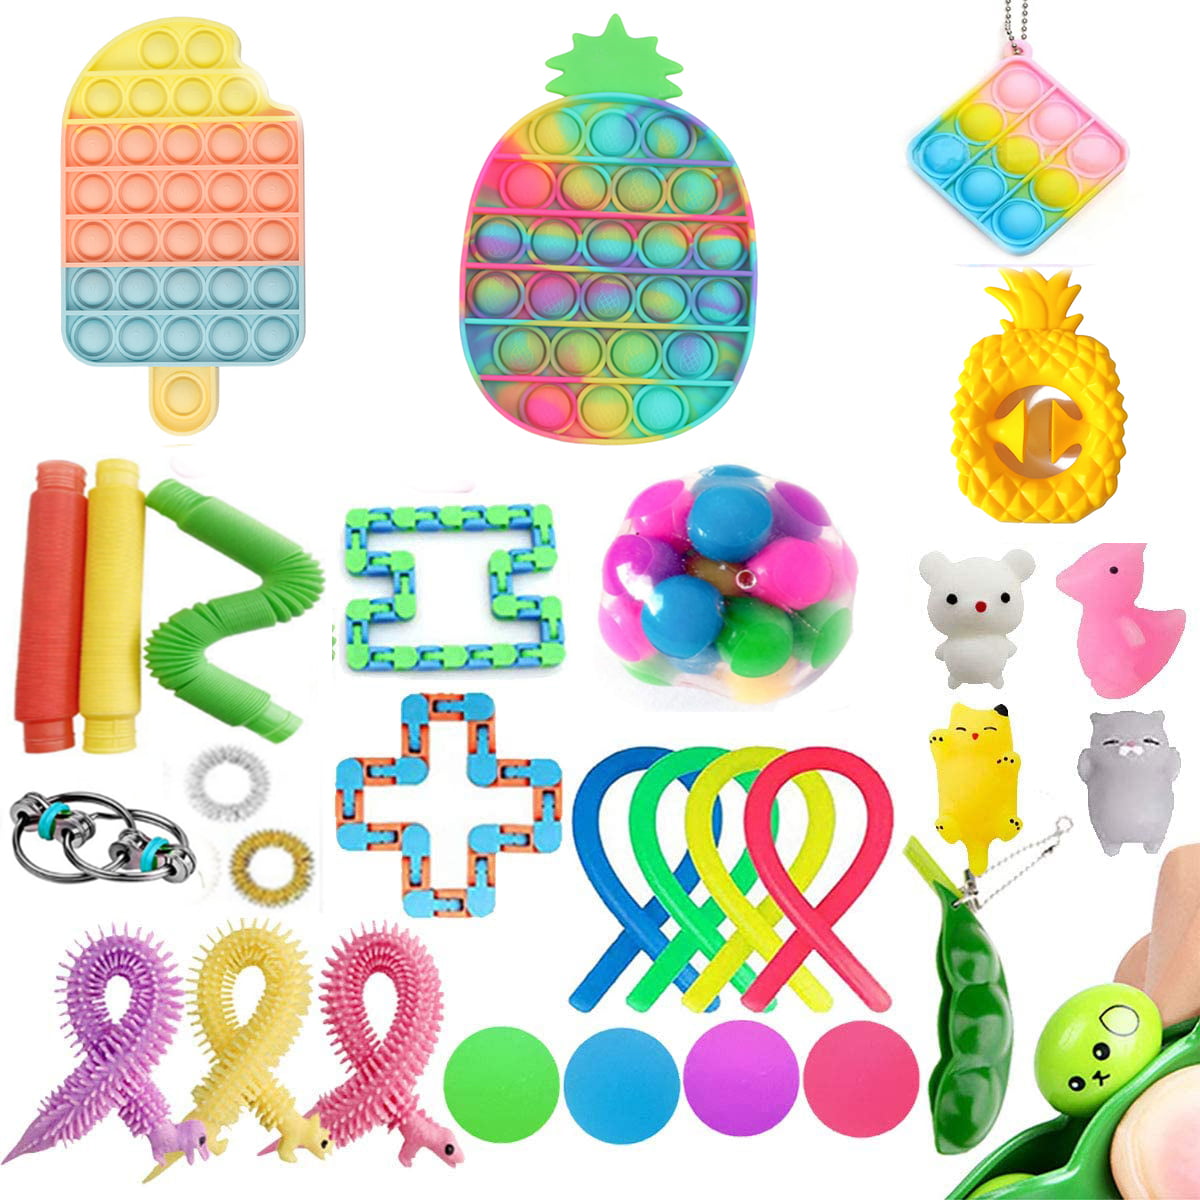 Details about   20x Fidget Sensory Toy Sets Autism ADHD Stress Relief Special Need Education Toy 